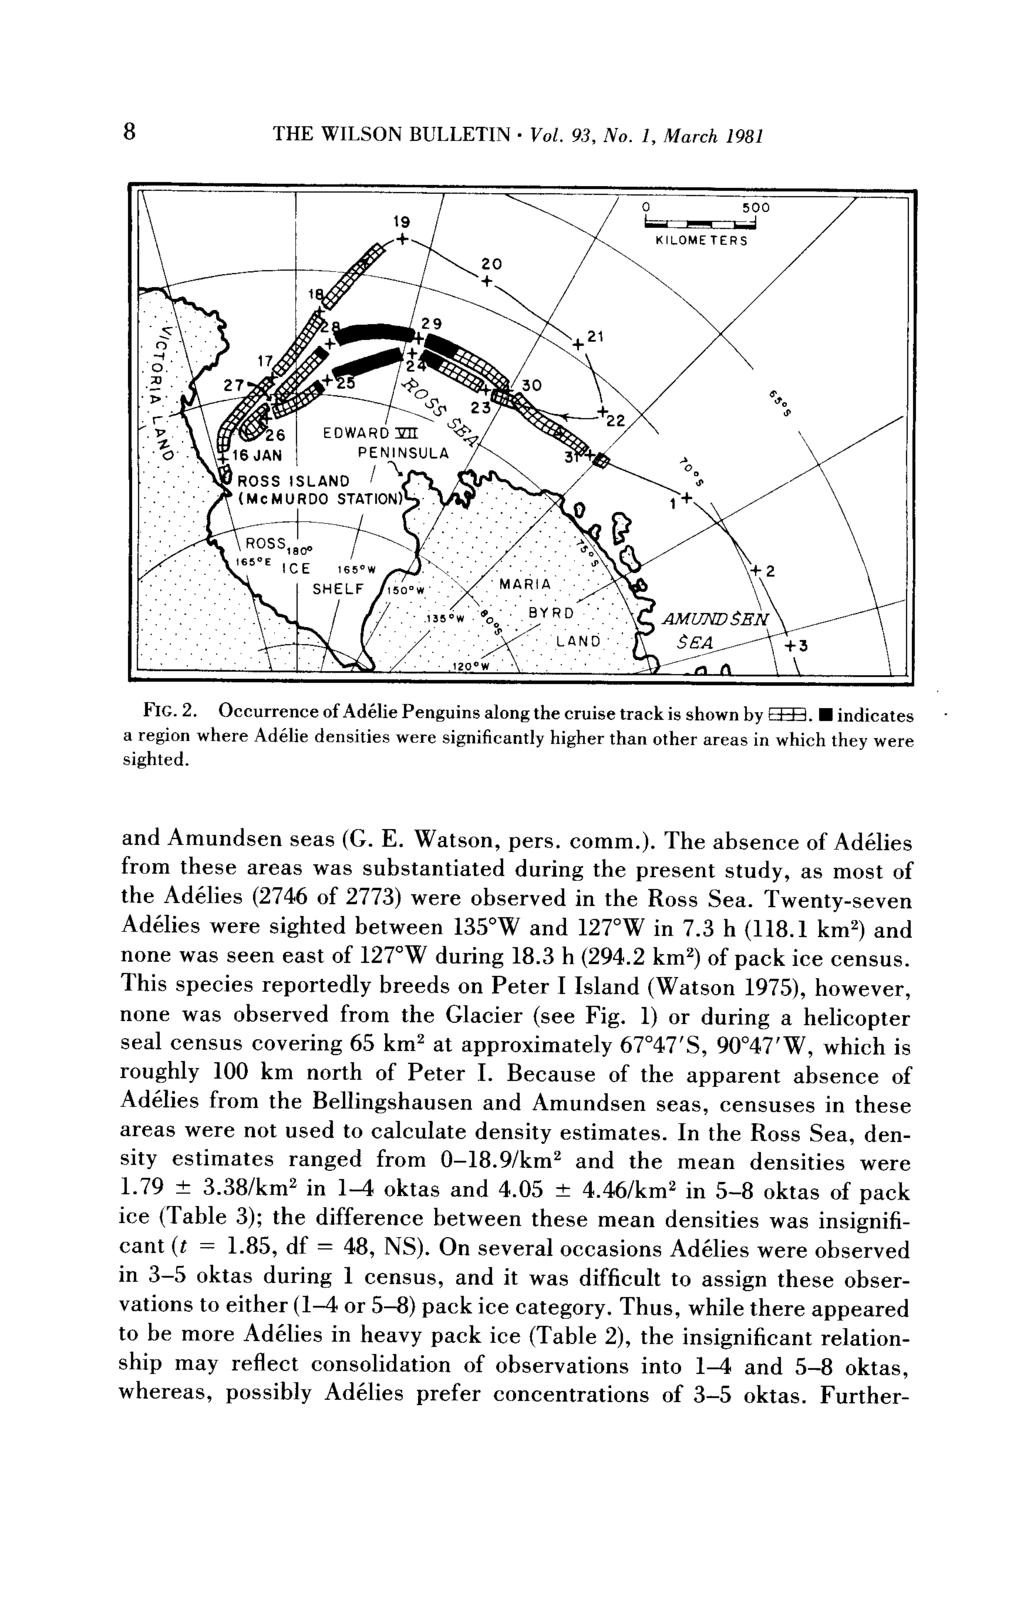 8 THE WILSON BULLETIN - Vol. 93, No. 1, March 1981 FIG. 2. Occurrence of Ad&lie Penguins along the cruise track is shown by Ef3.